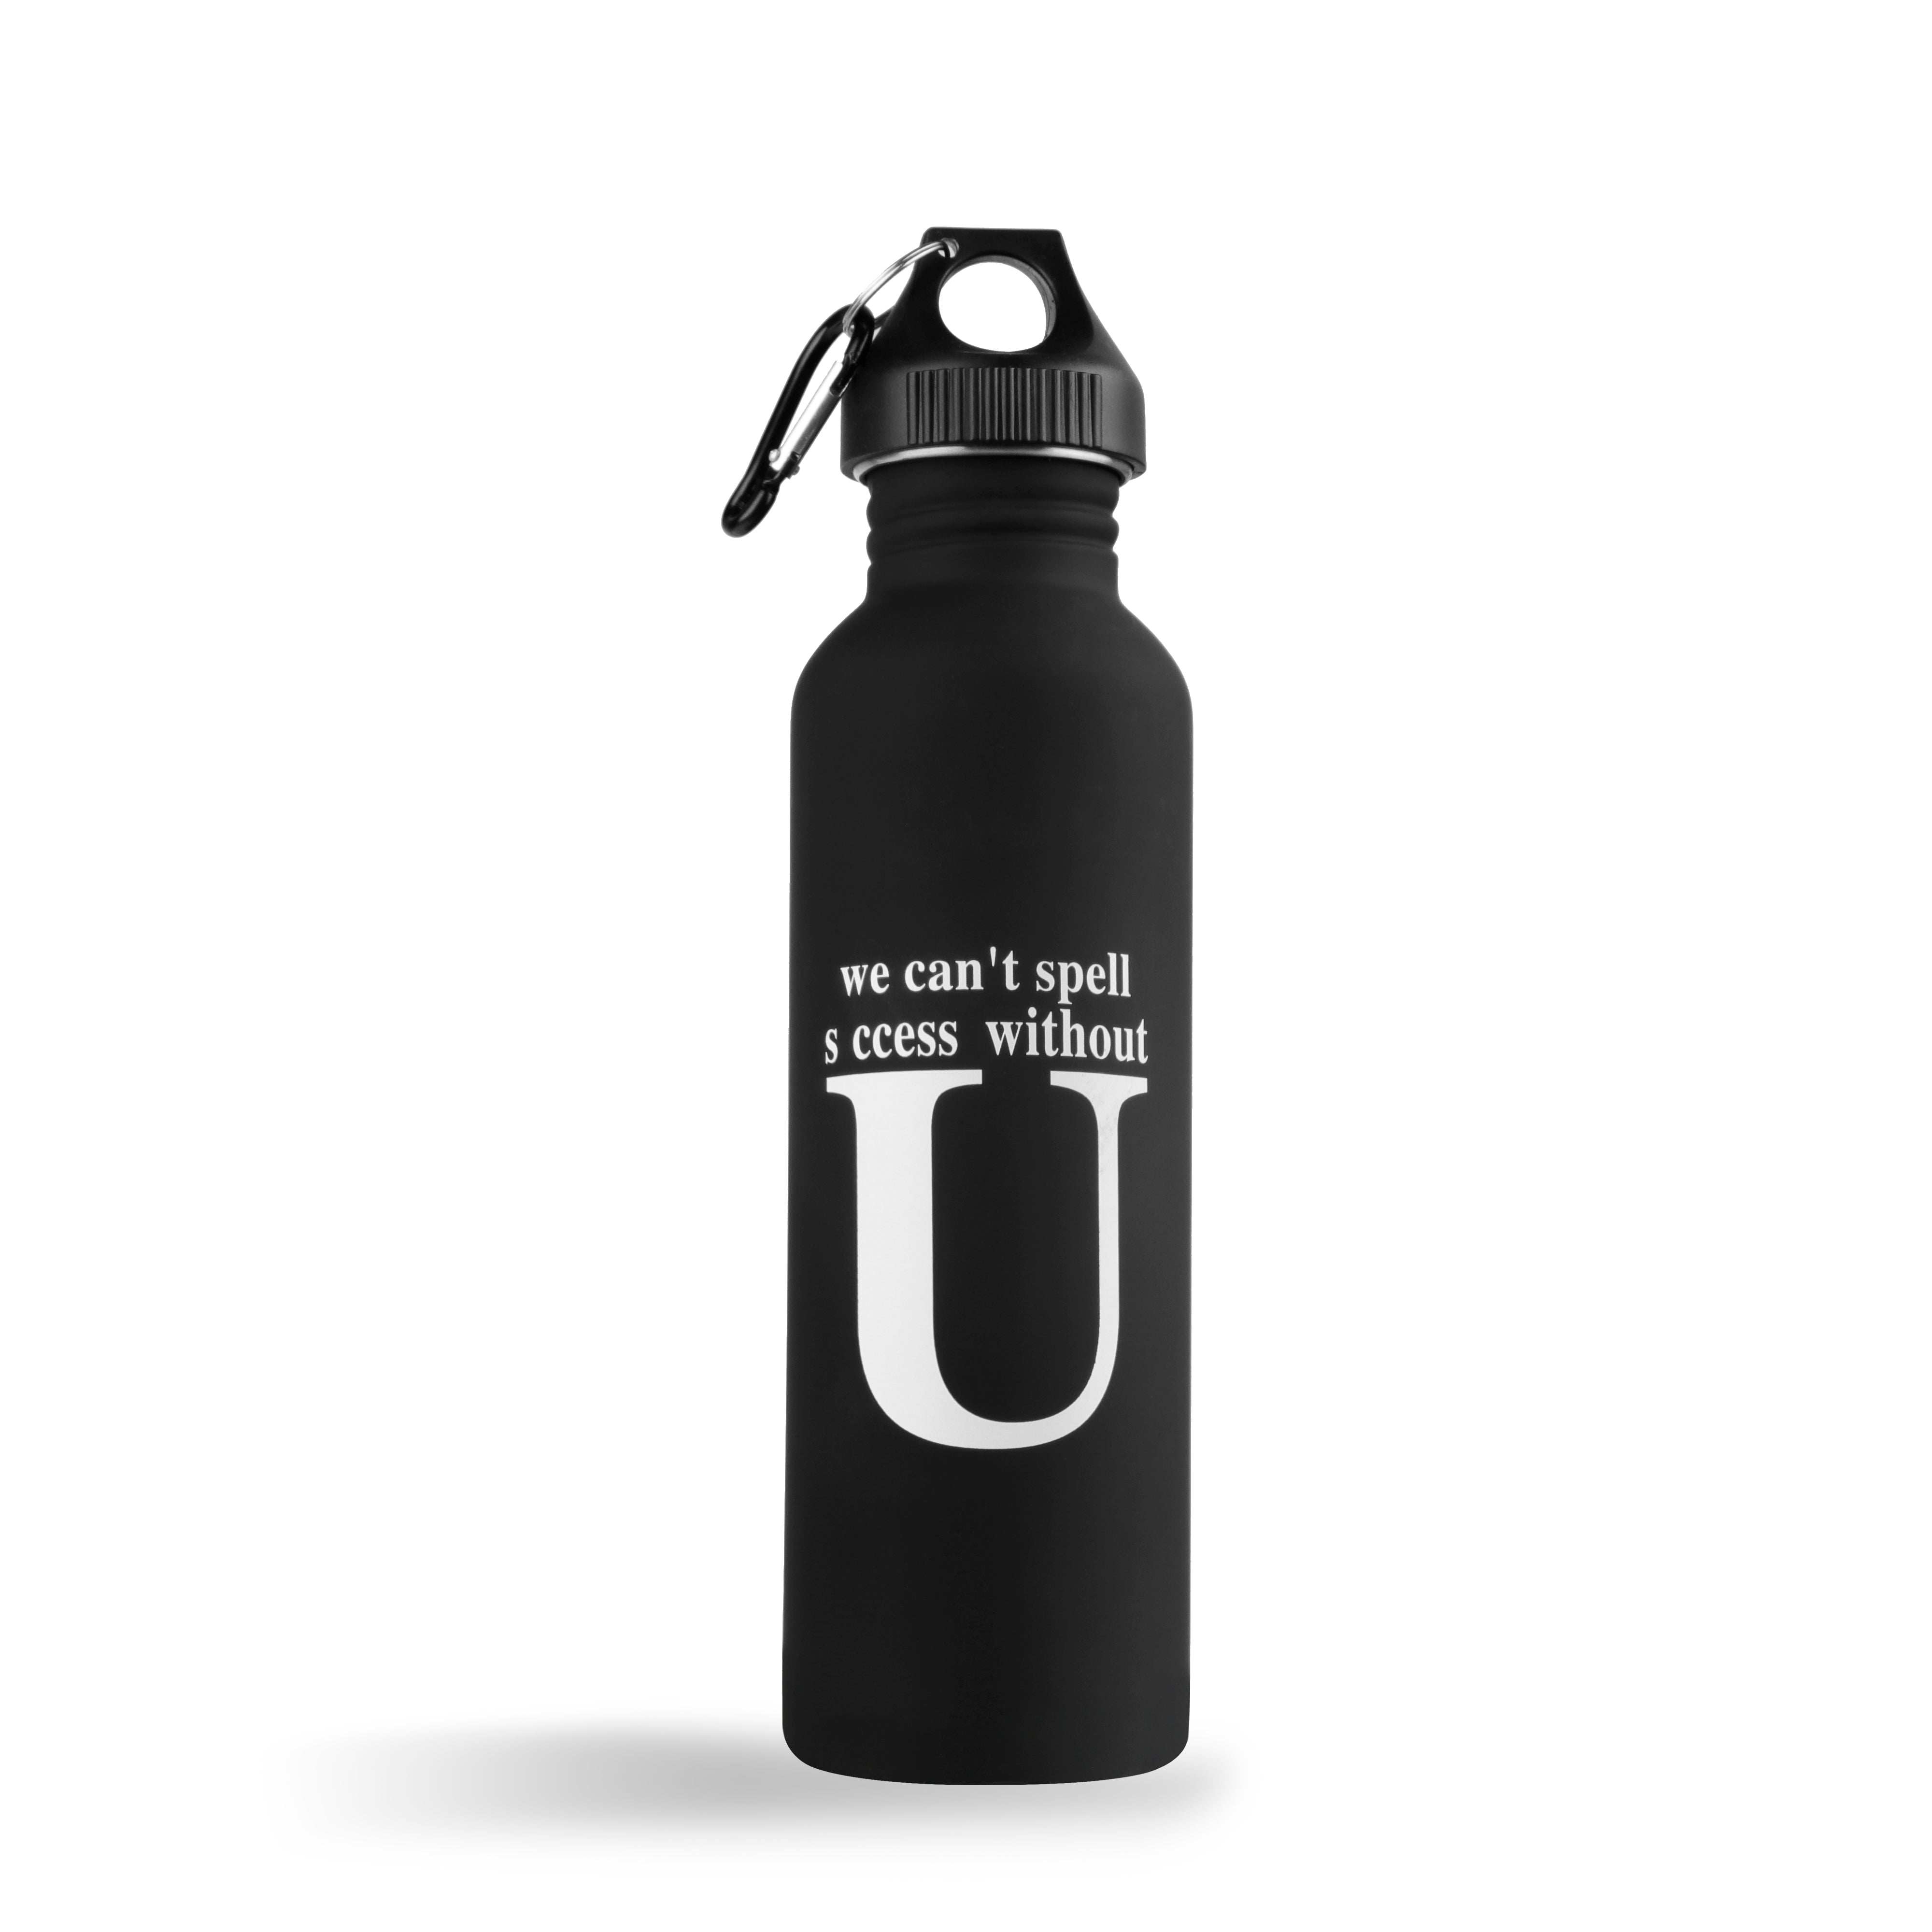 Archies | Archies Printed Stainless Steel Sipper Water Bottle & Notebook Combo With Corporate Quote Theme 1